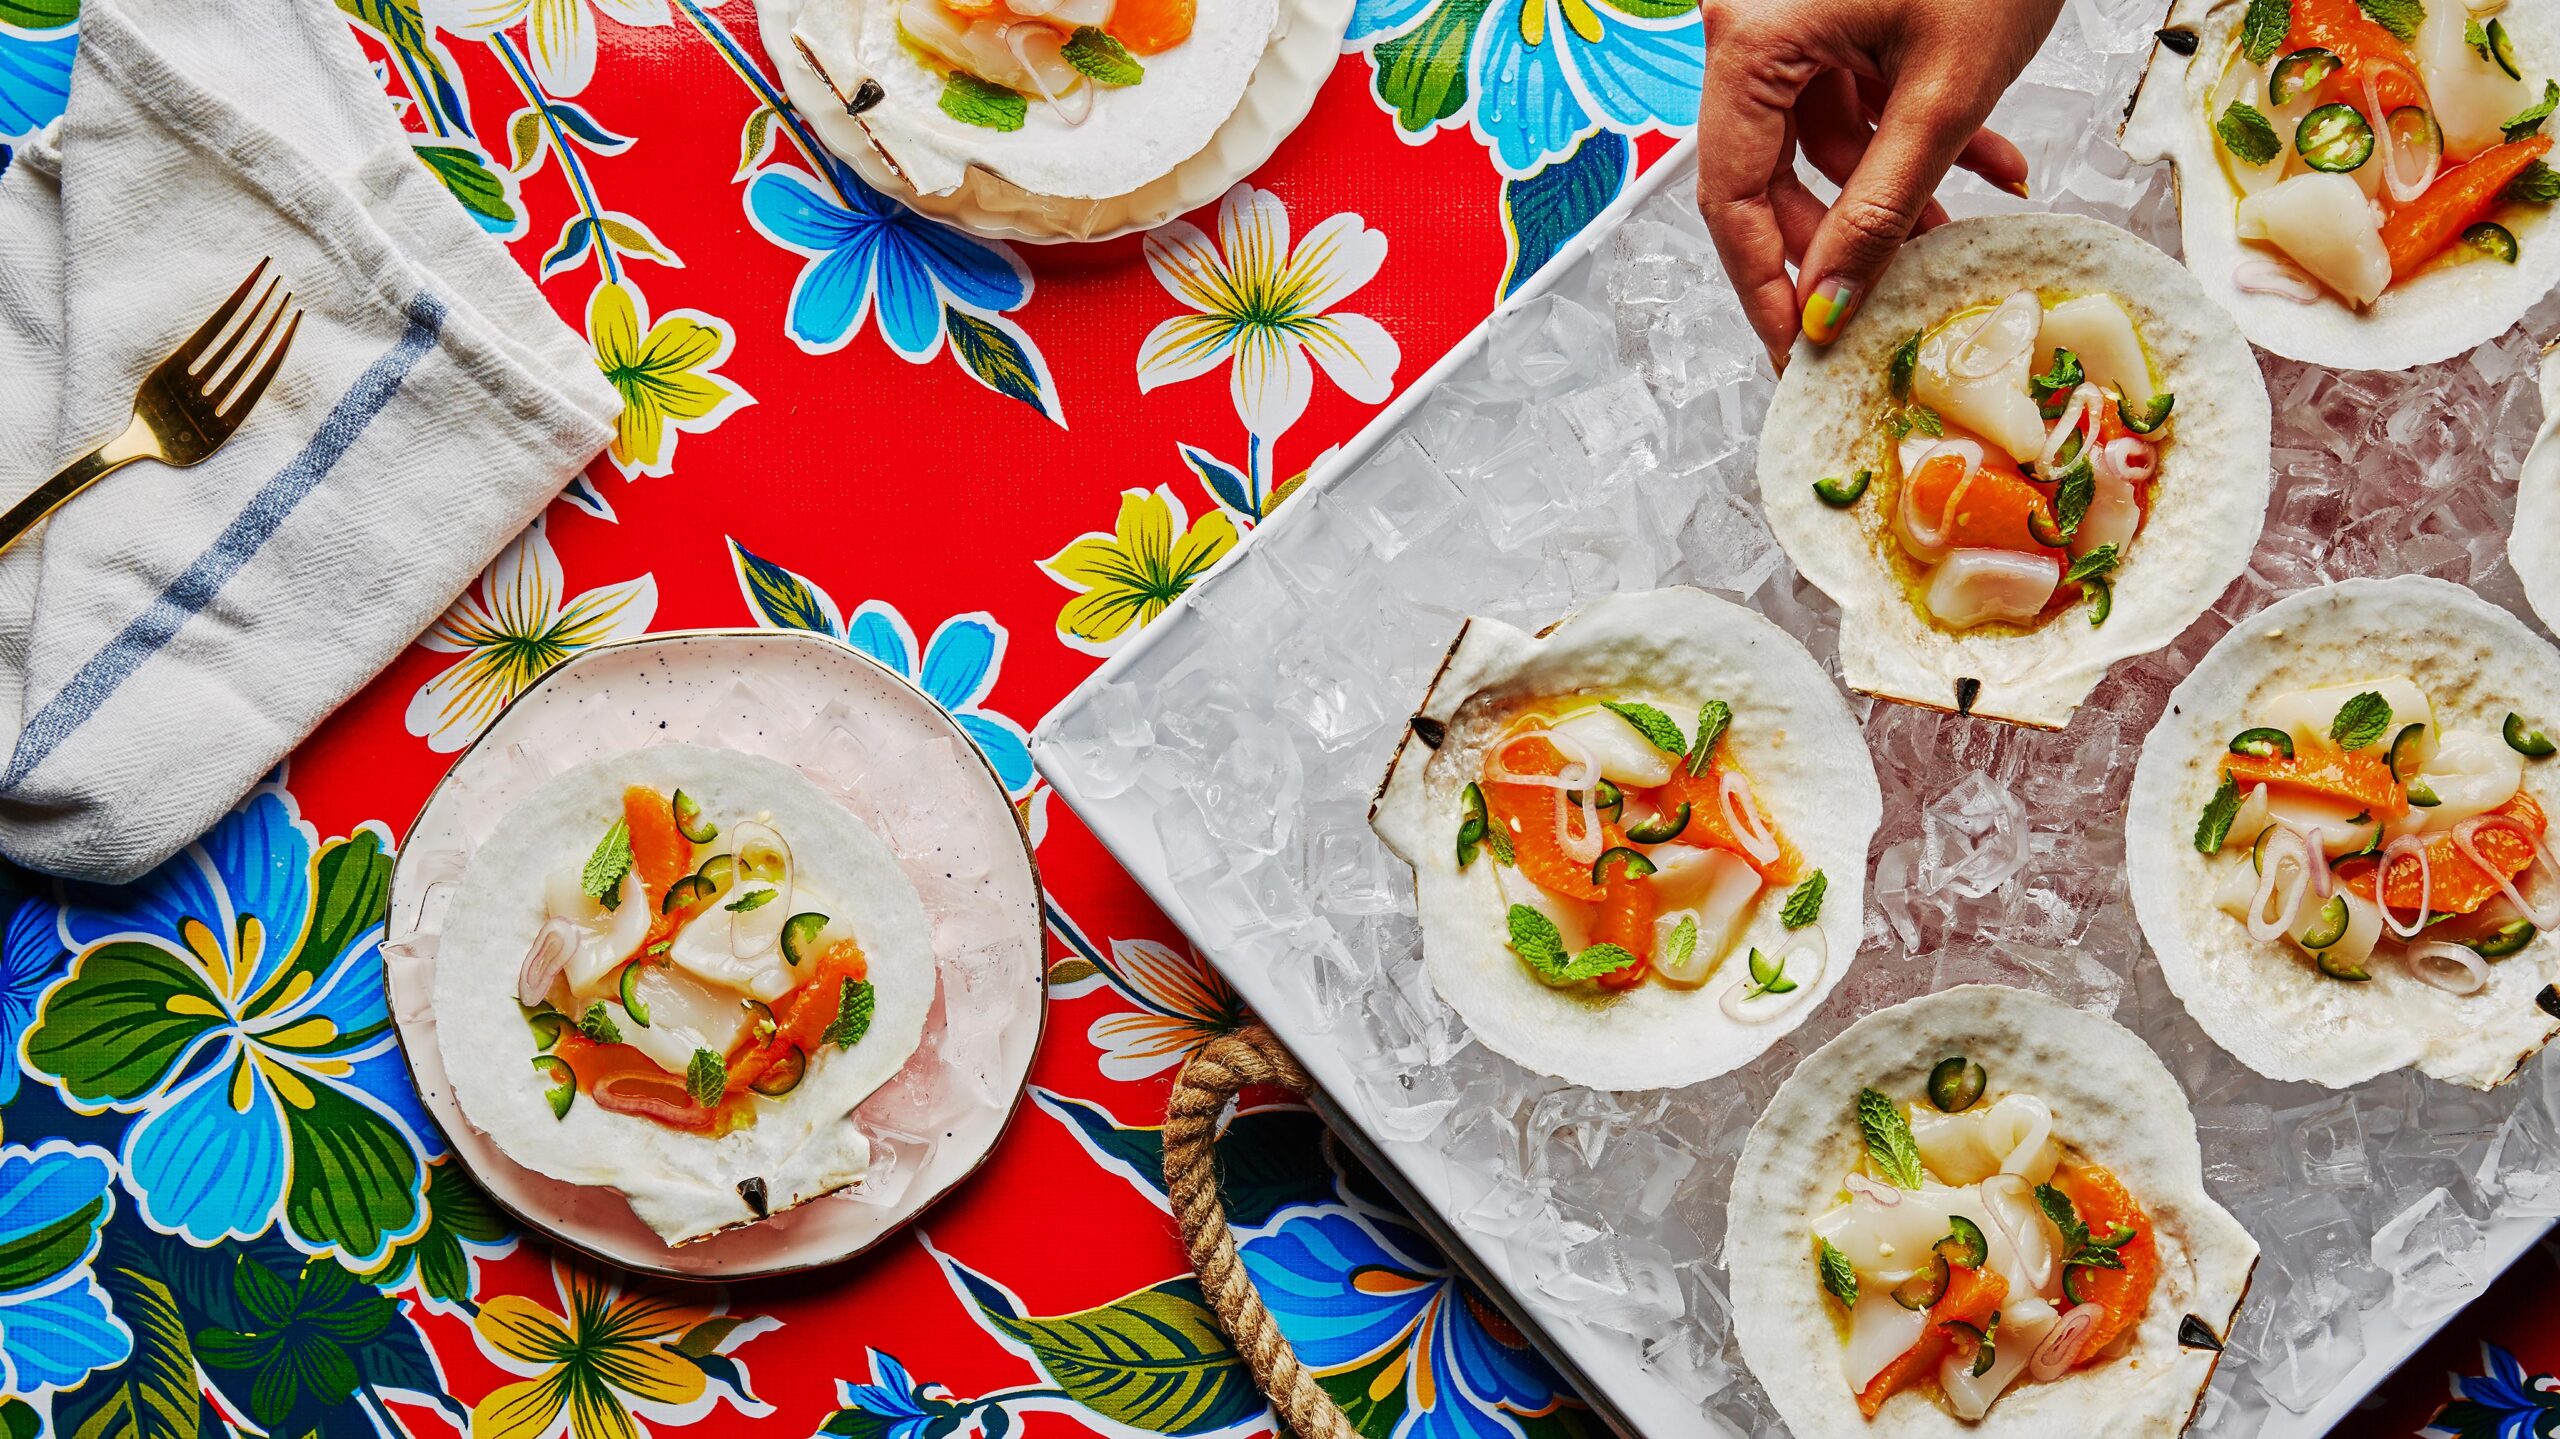  Bite-sized morsels of tender scallops dance in a marinade of vibrant citrus flavors